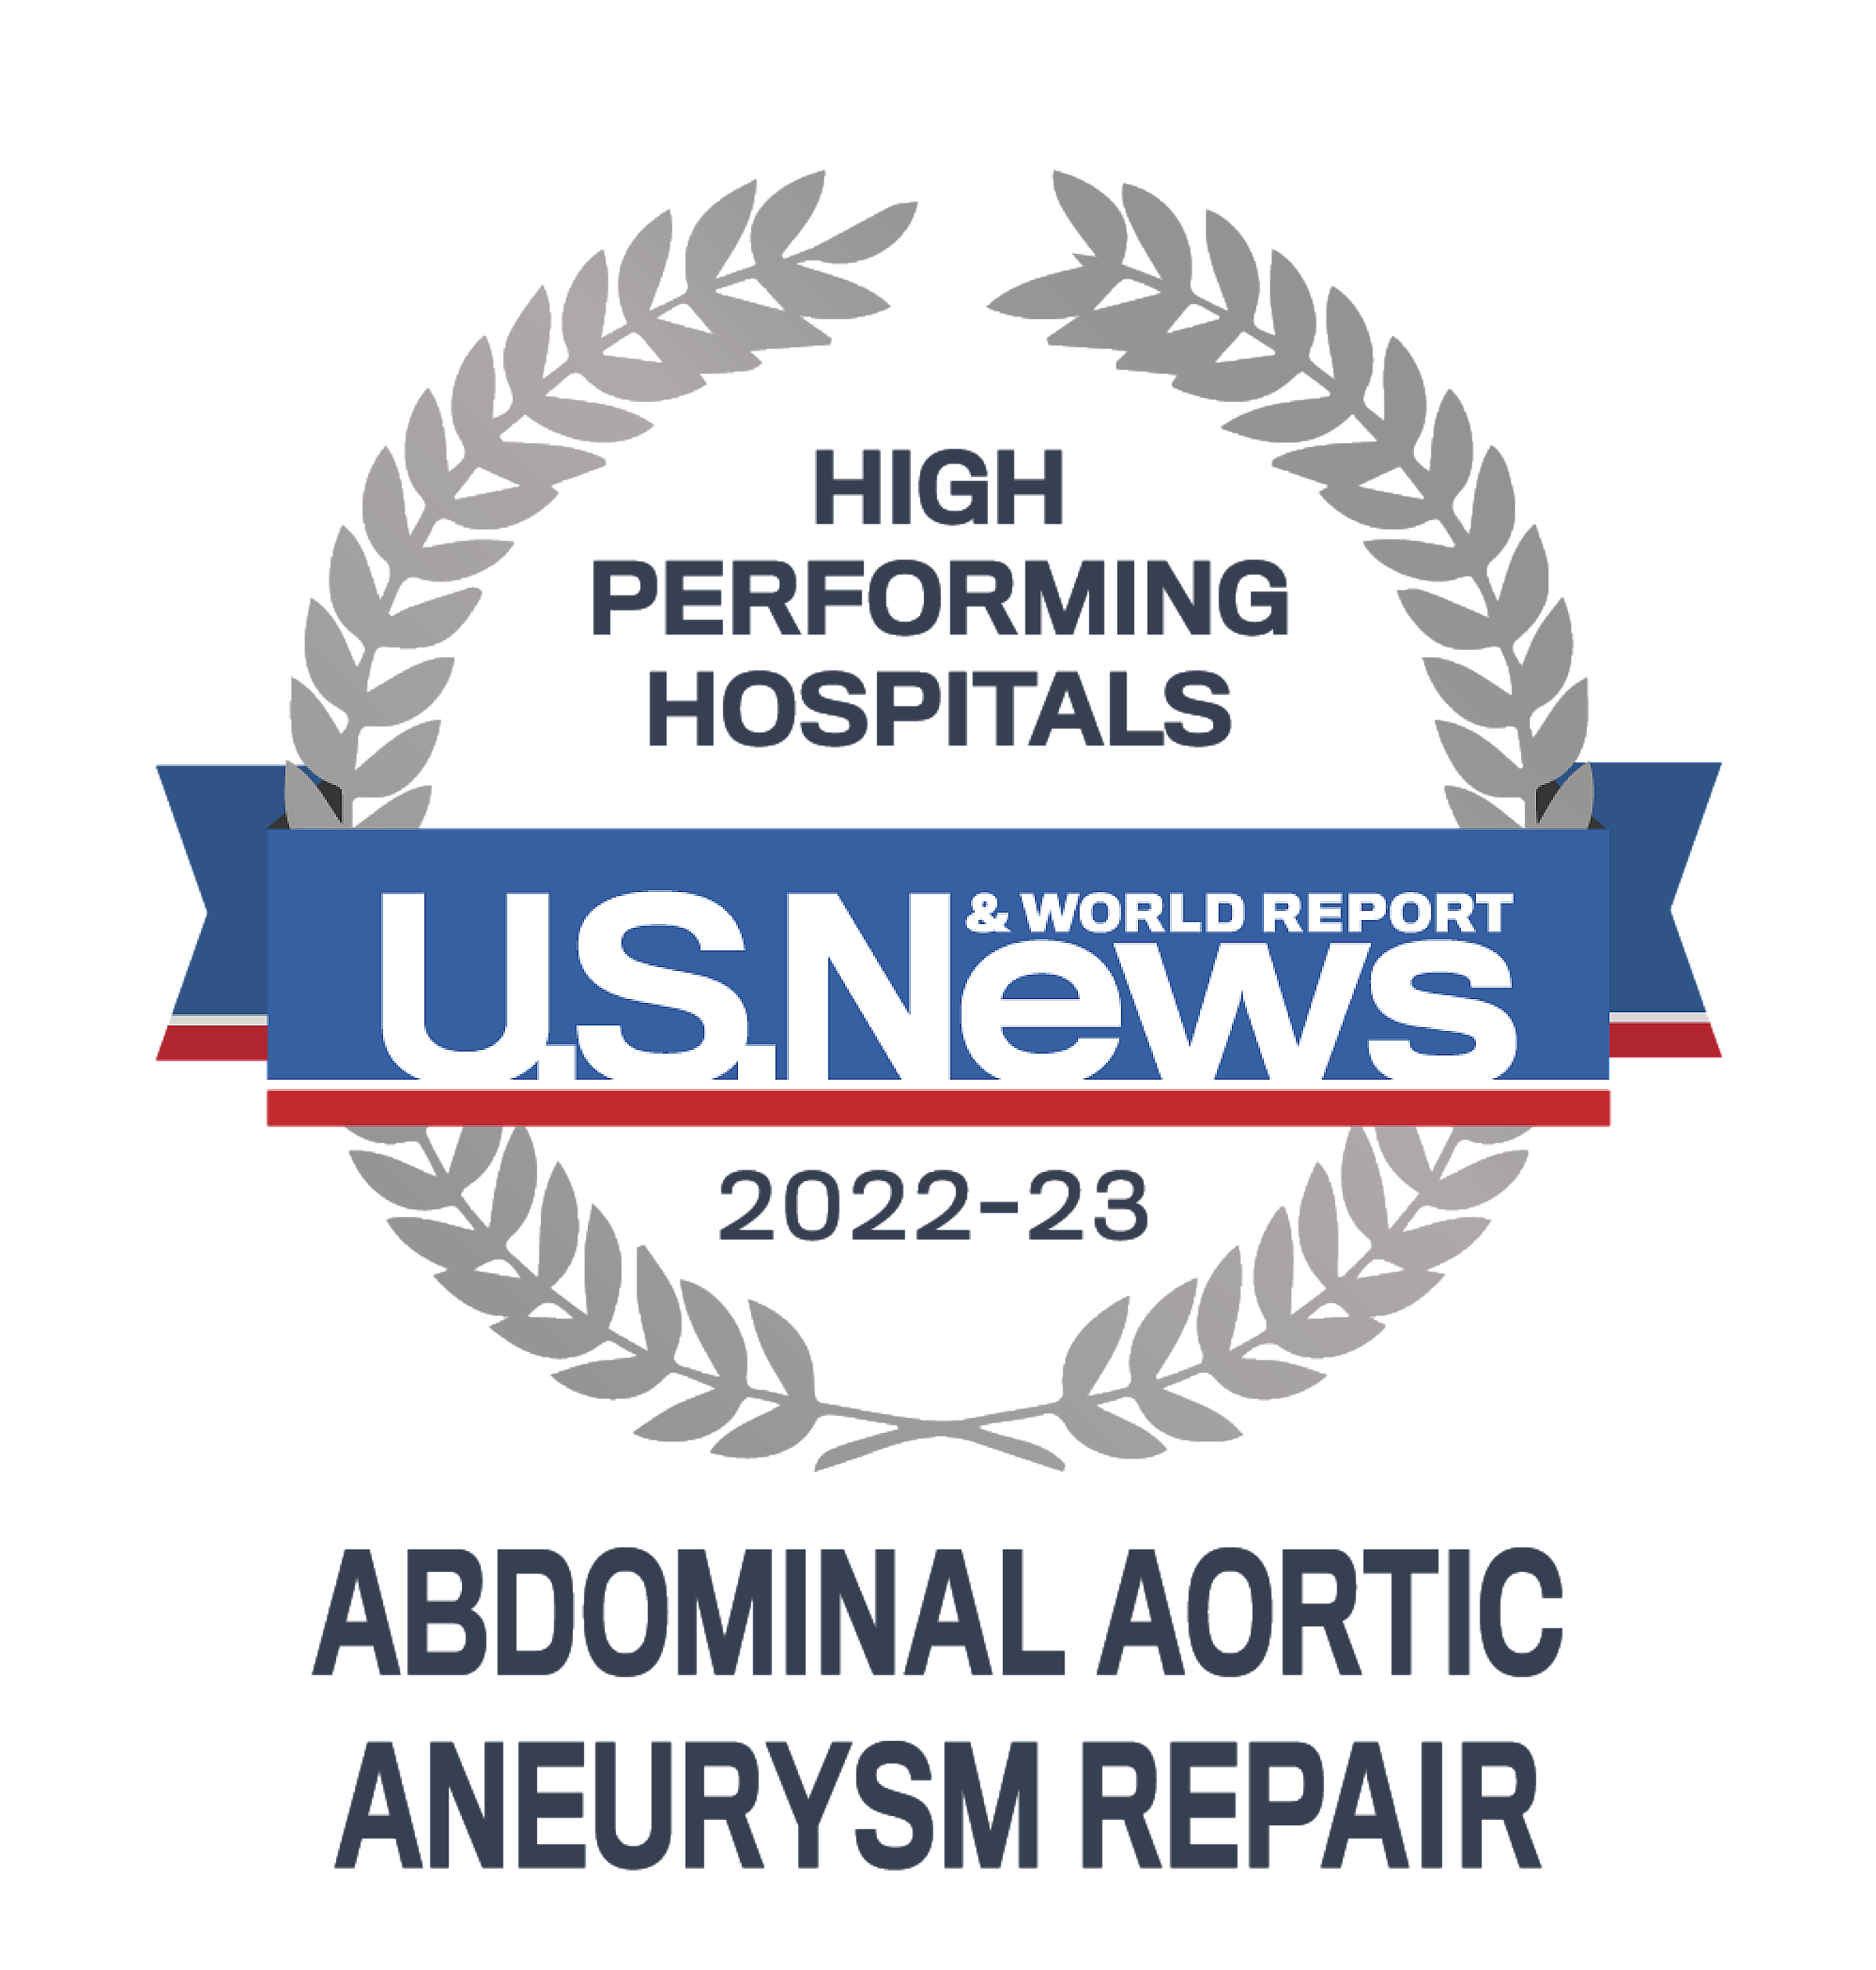 High performing treatment for abdominal aortic aneurysm treatment badge from US News & World Report 2022-2023